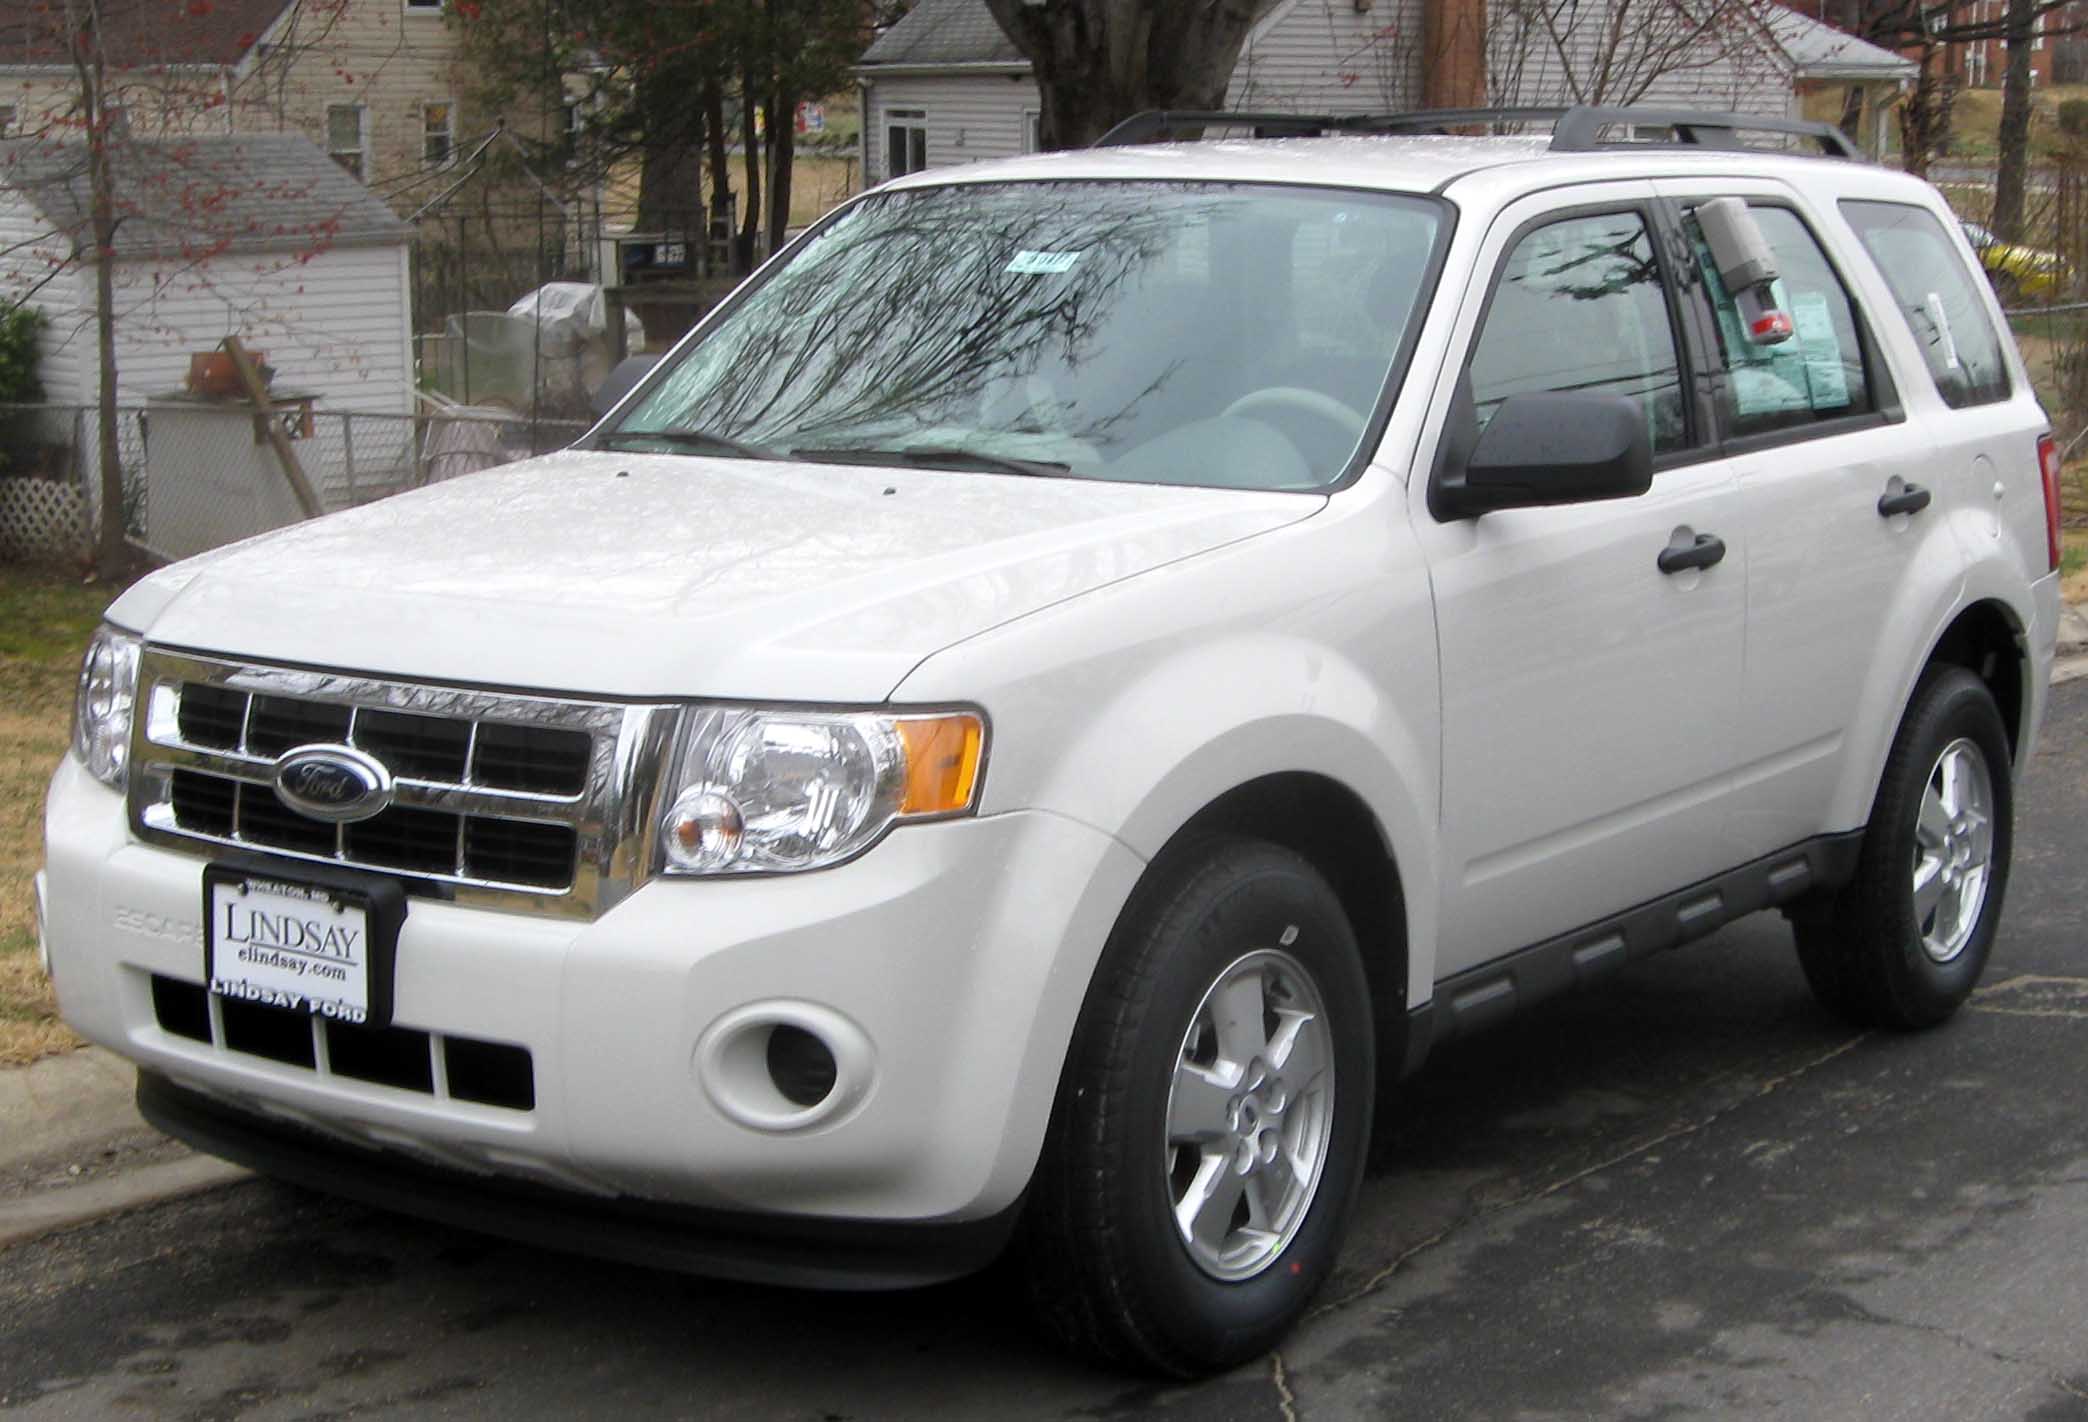 File:2009 Ford Escape XLS.jpg - Wikimedia Commons